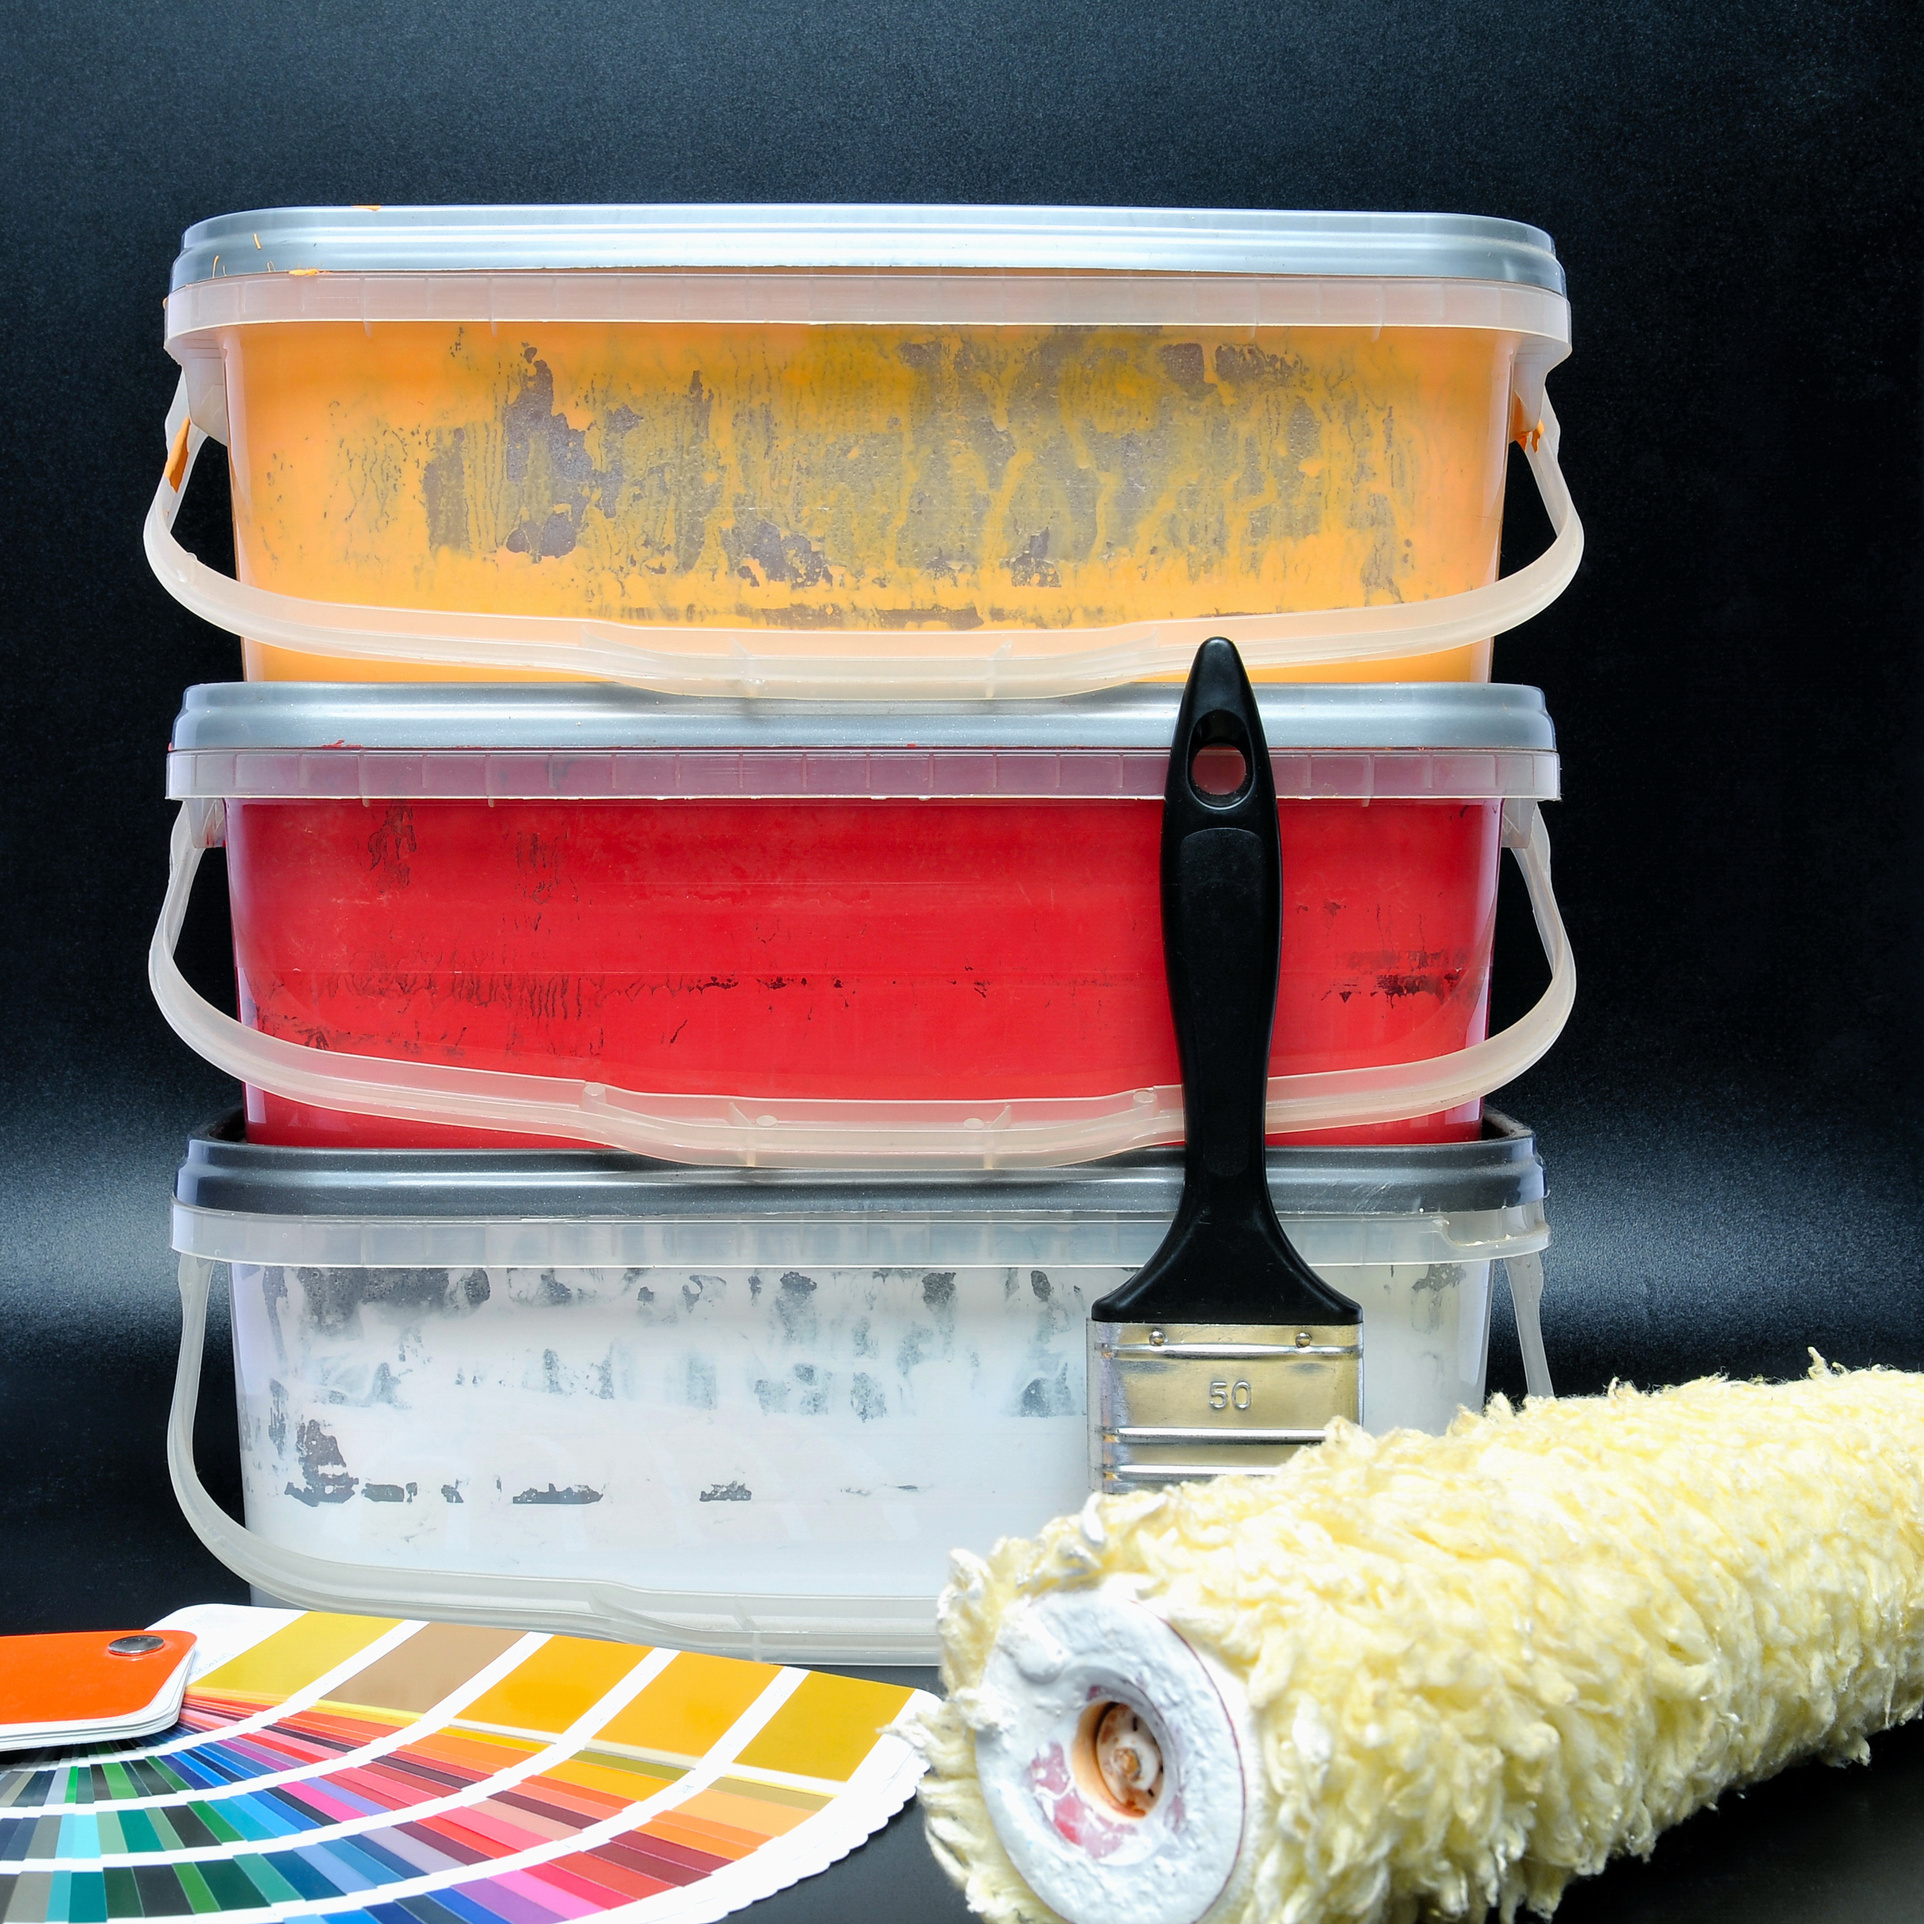 paint buckets, paint brush and paint roller